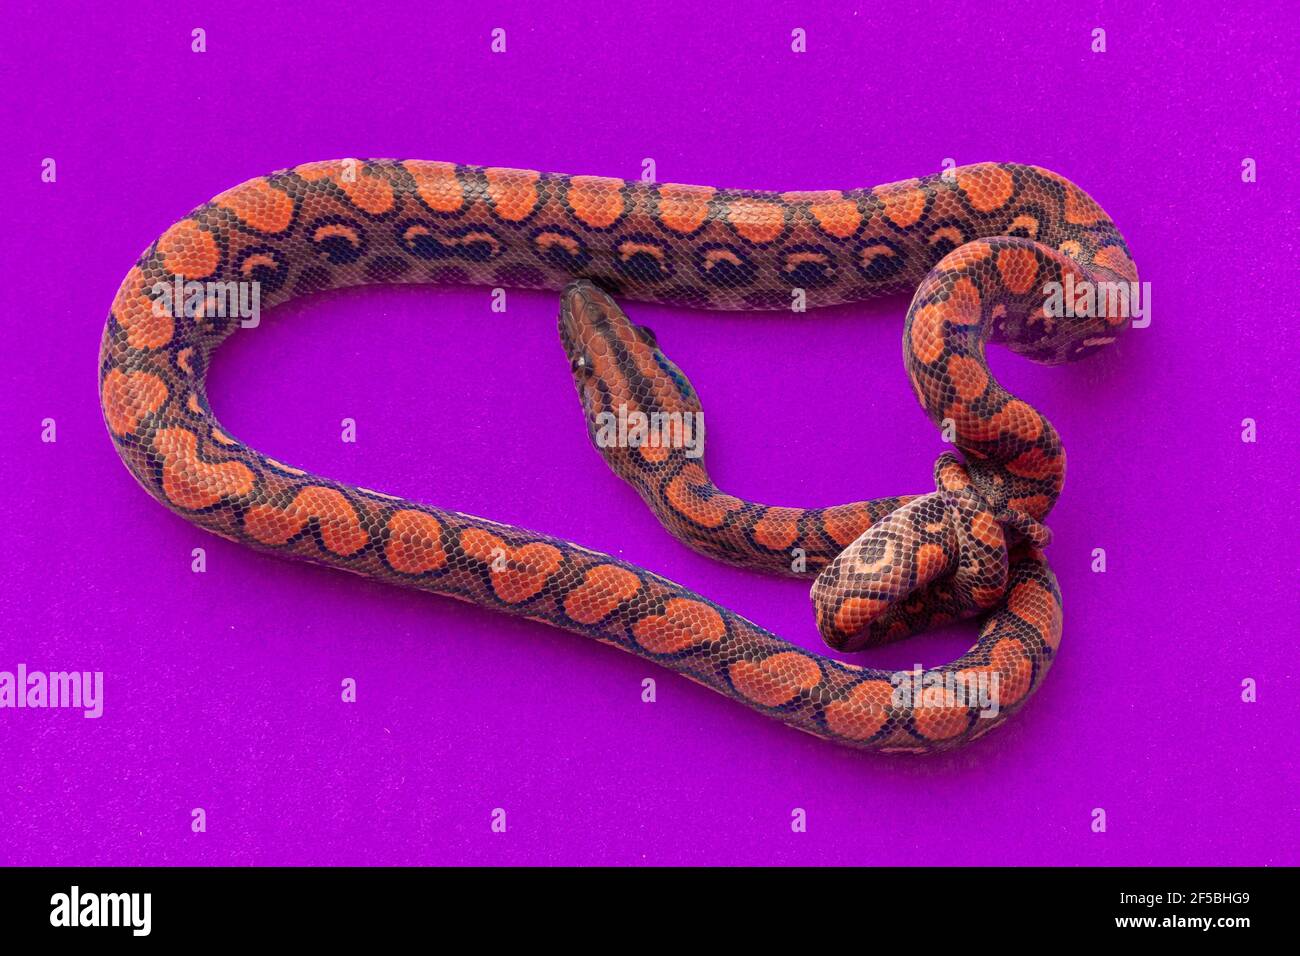 Epicrates cenchria is a boa species endemic to Central and South America. Common names include the rainbow boa, and slender boa Stock Photo